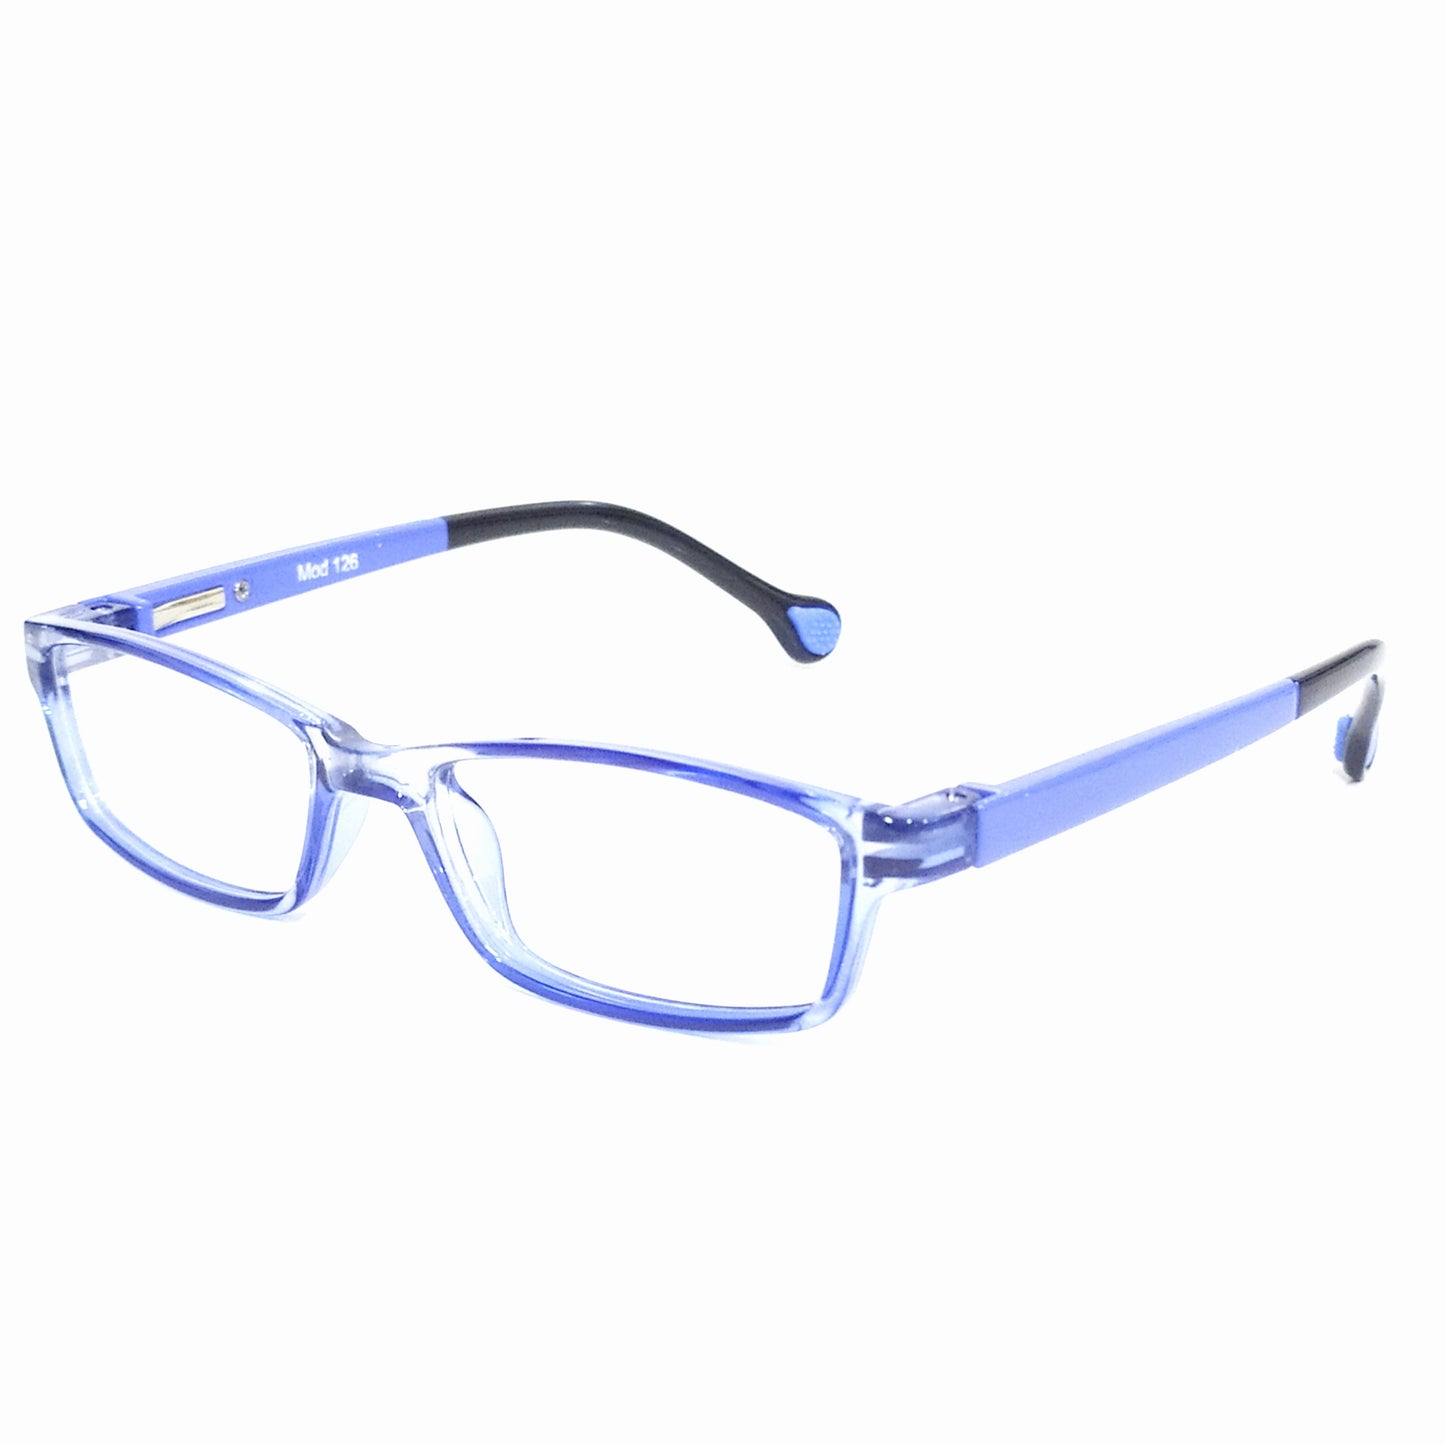 Blue Kids Spectacle Frames for 4-7 Years Old